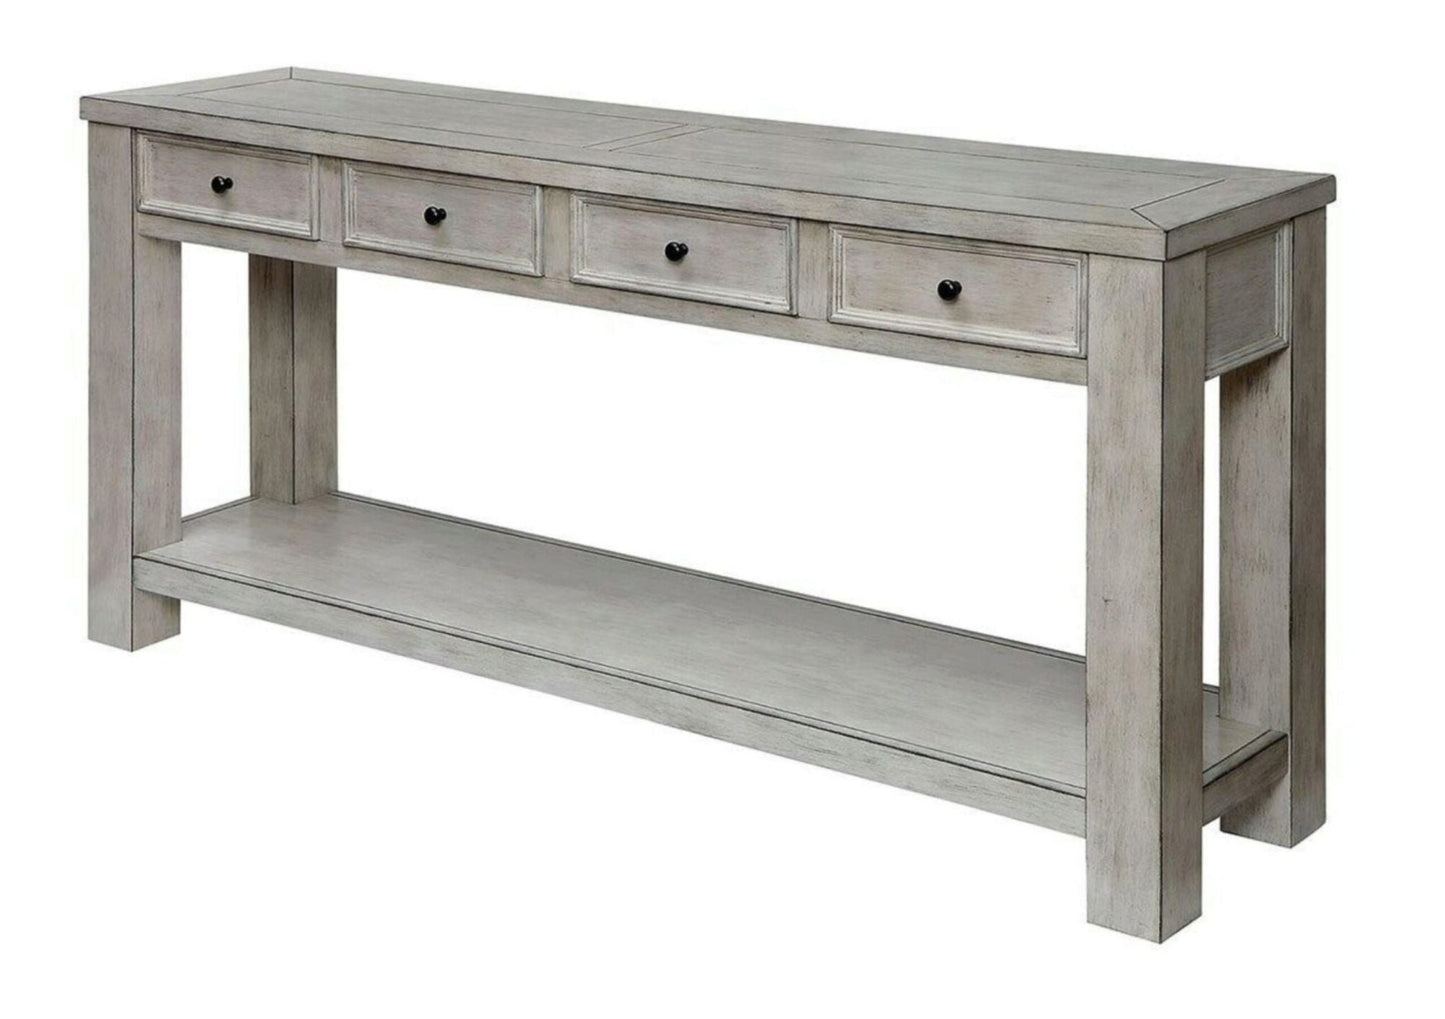 Sofa Table Antique White Rustic Solid wood Storage Table Open Shelf Bottom Living Room 1pc Side Table. Home Decor by Design